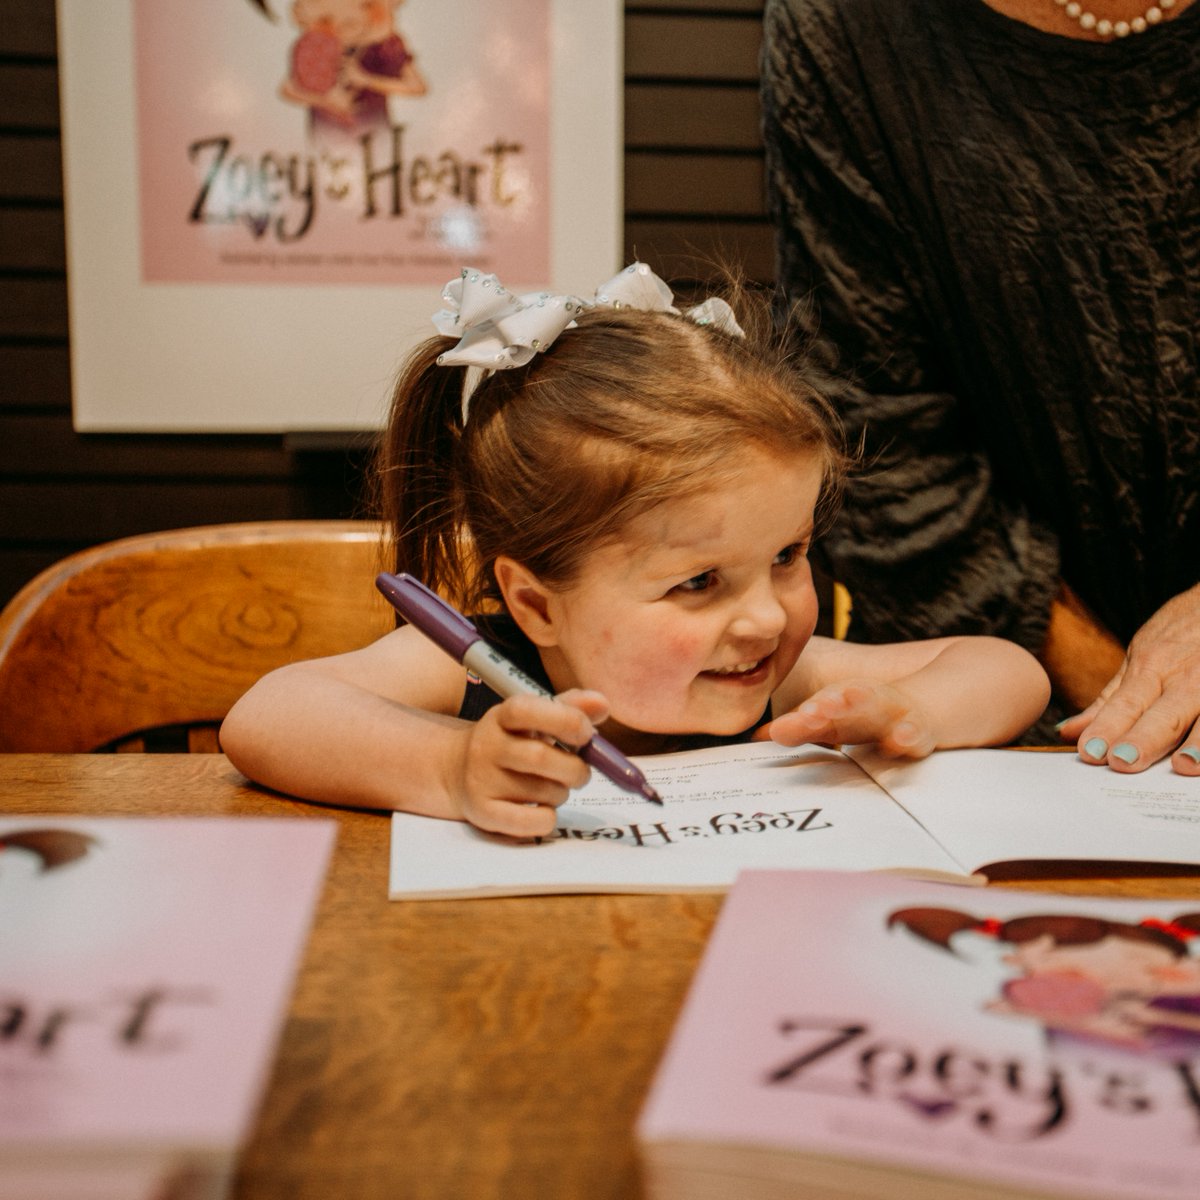 Zoey copes with her heart condition by escaping into books. Her wish to have a kid's book written about her puts an inspiring twist on Zoey’s life and journey with congenital heart disease. Celebrate #HeartOfAWish this #AmericanHeartMonth by visiting wish.org/heart 💙